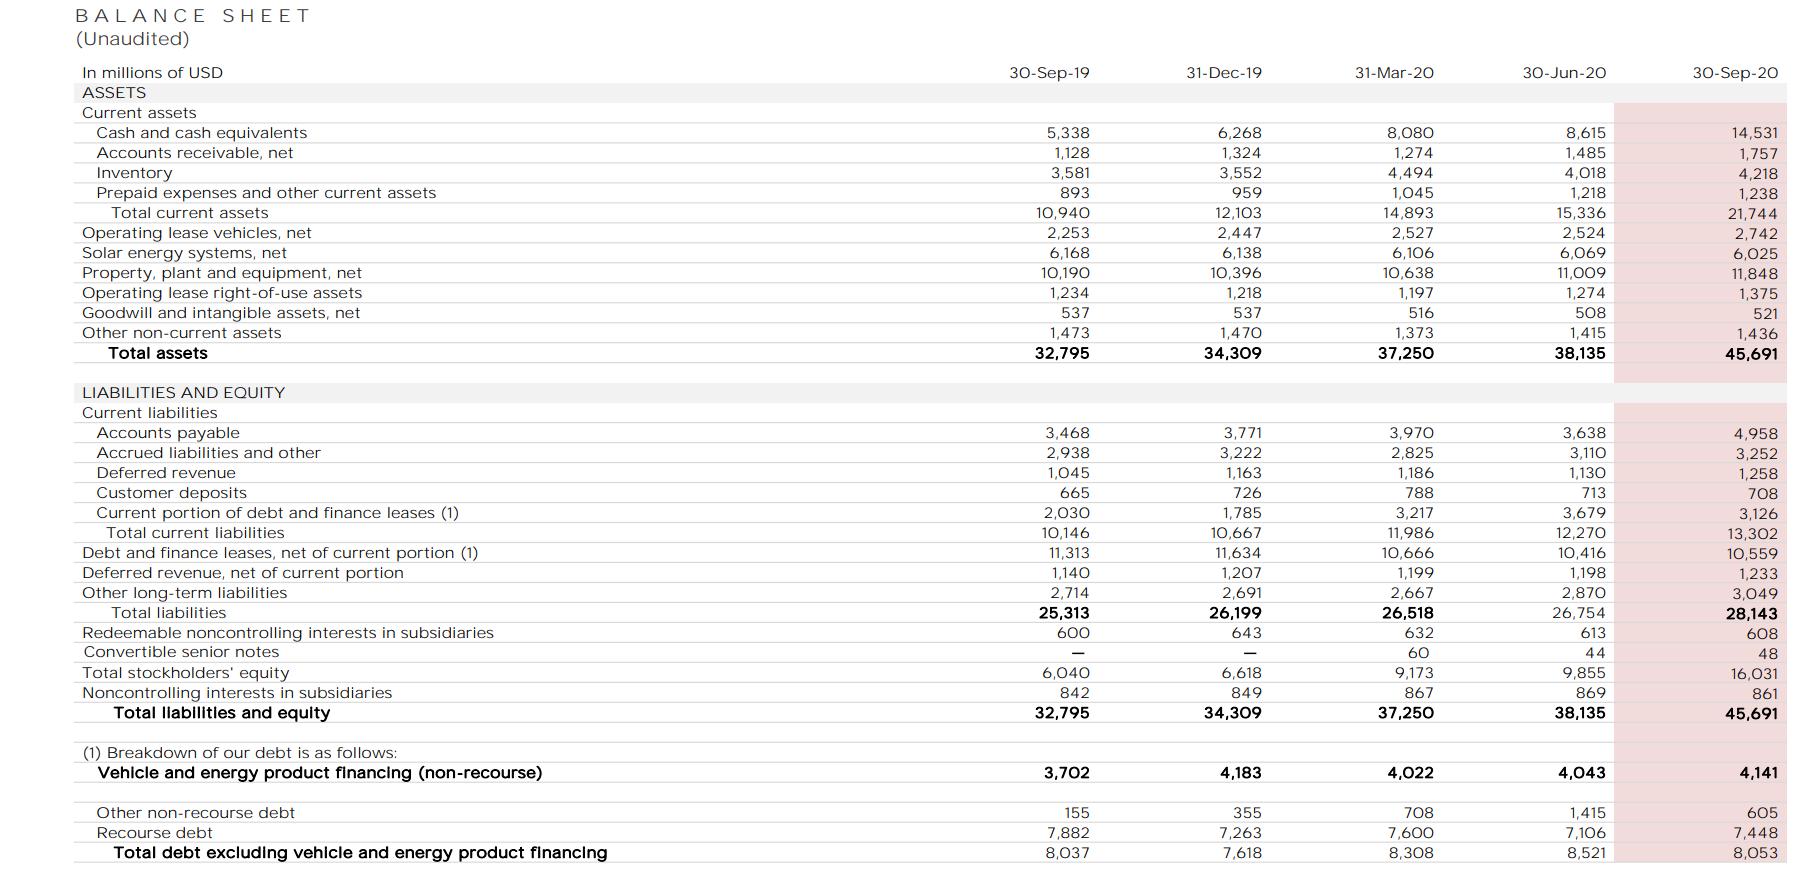 30-Sep-19 31-Dec-19 31-Mar-20 30-Jun-20 30-Sep-20 5,338 1,128 3,581 BALANCE SHEET (Unaudited) In millions of USD ASSETS Curre